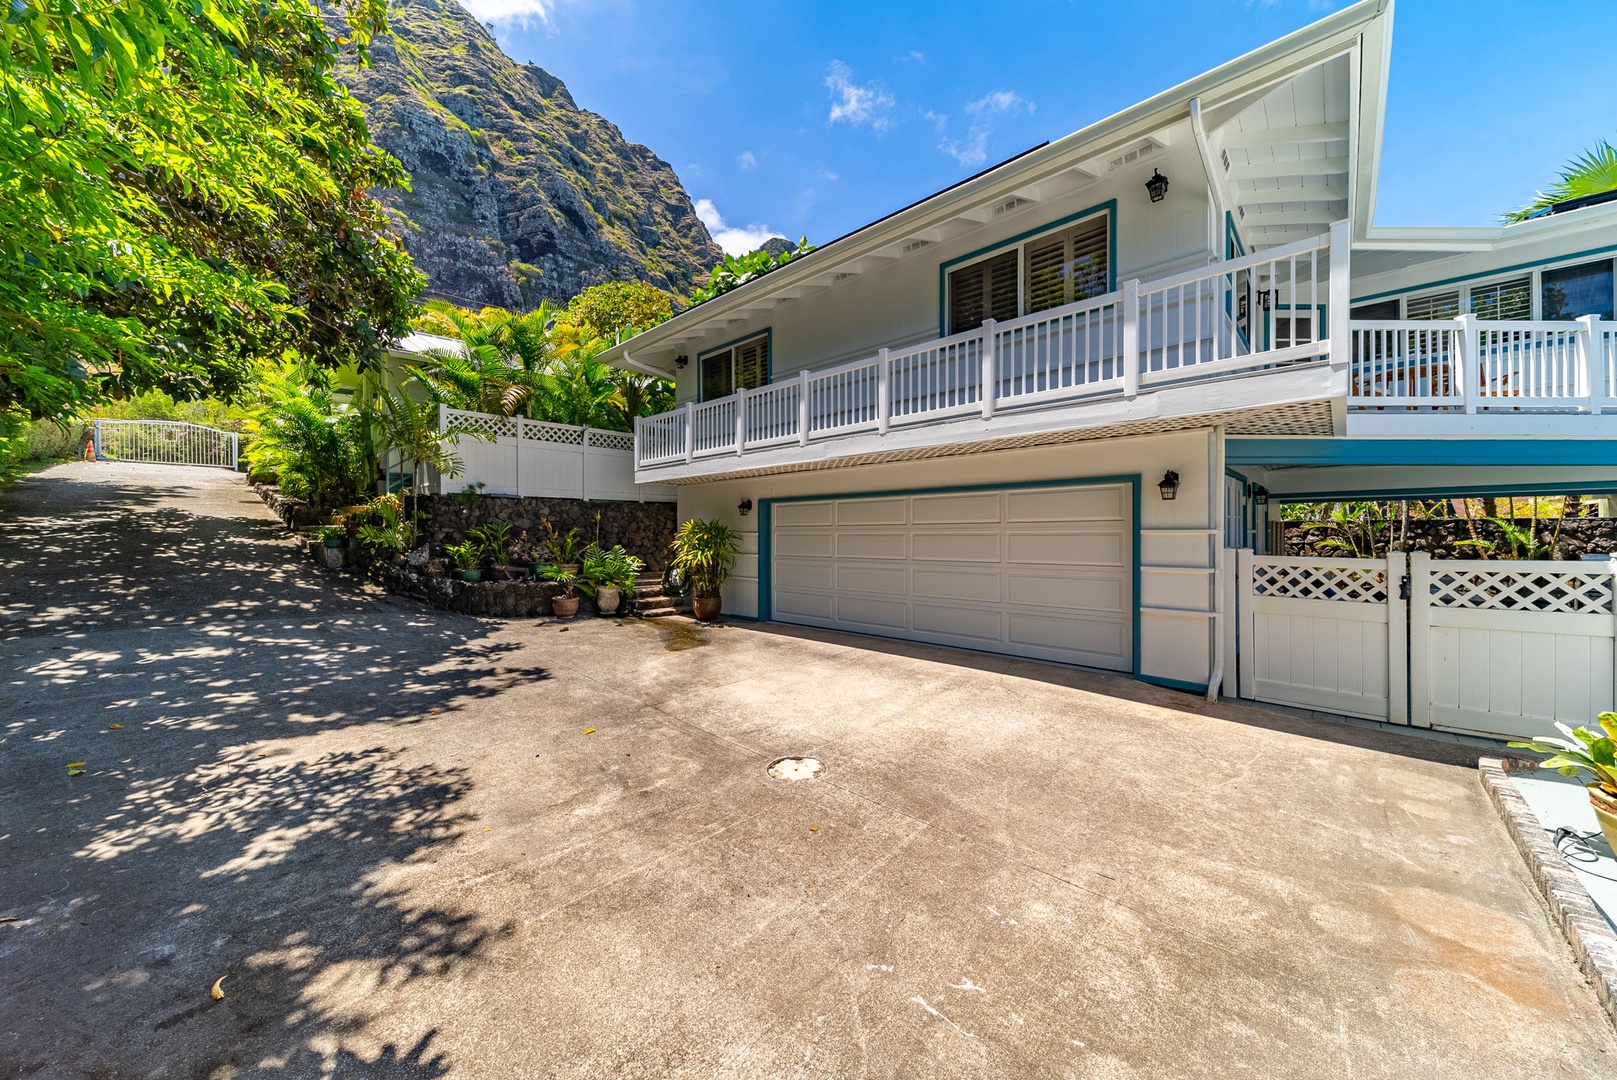 Waimanalo Vacation Rentals, Mana Kai at Waimanalo - Lower driveway parking for 2 vehicles max, upper driveway parking is also available. (No garage access)